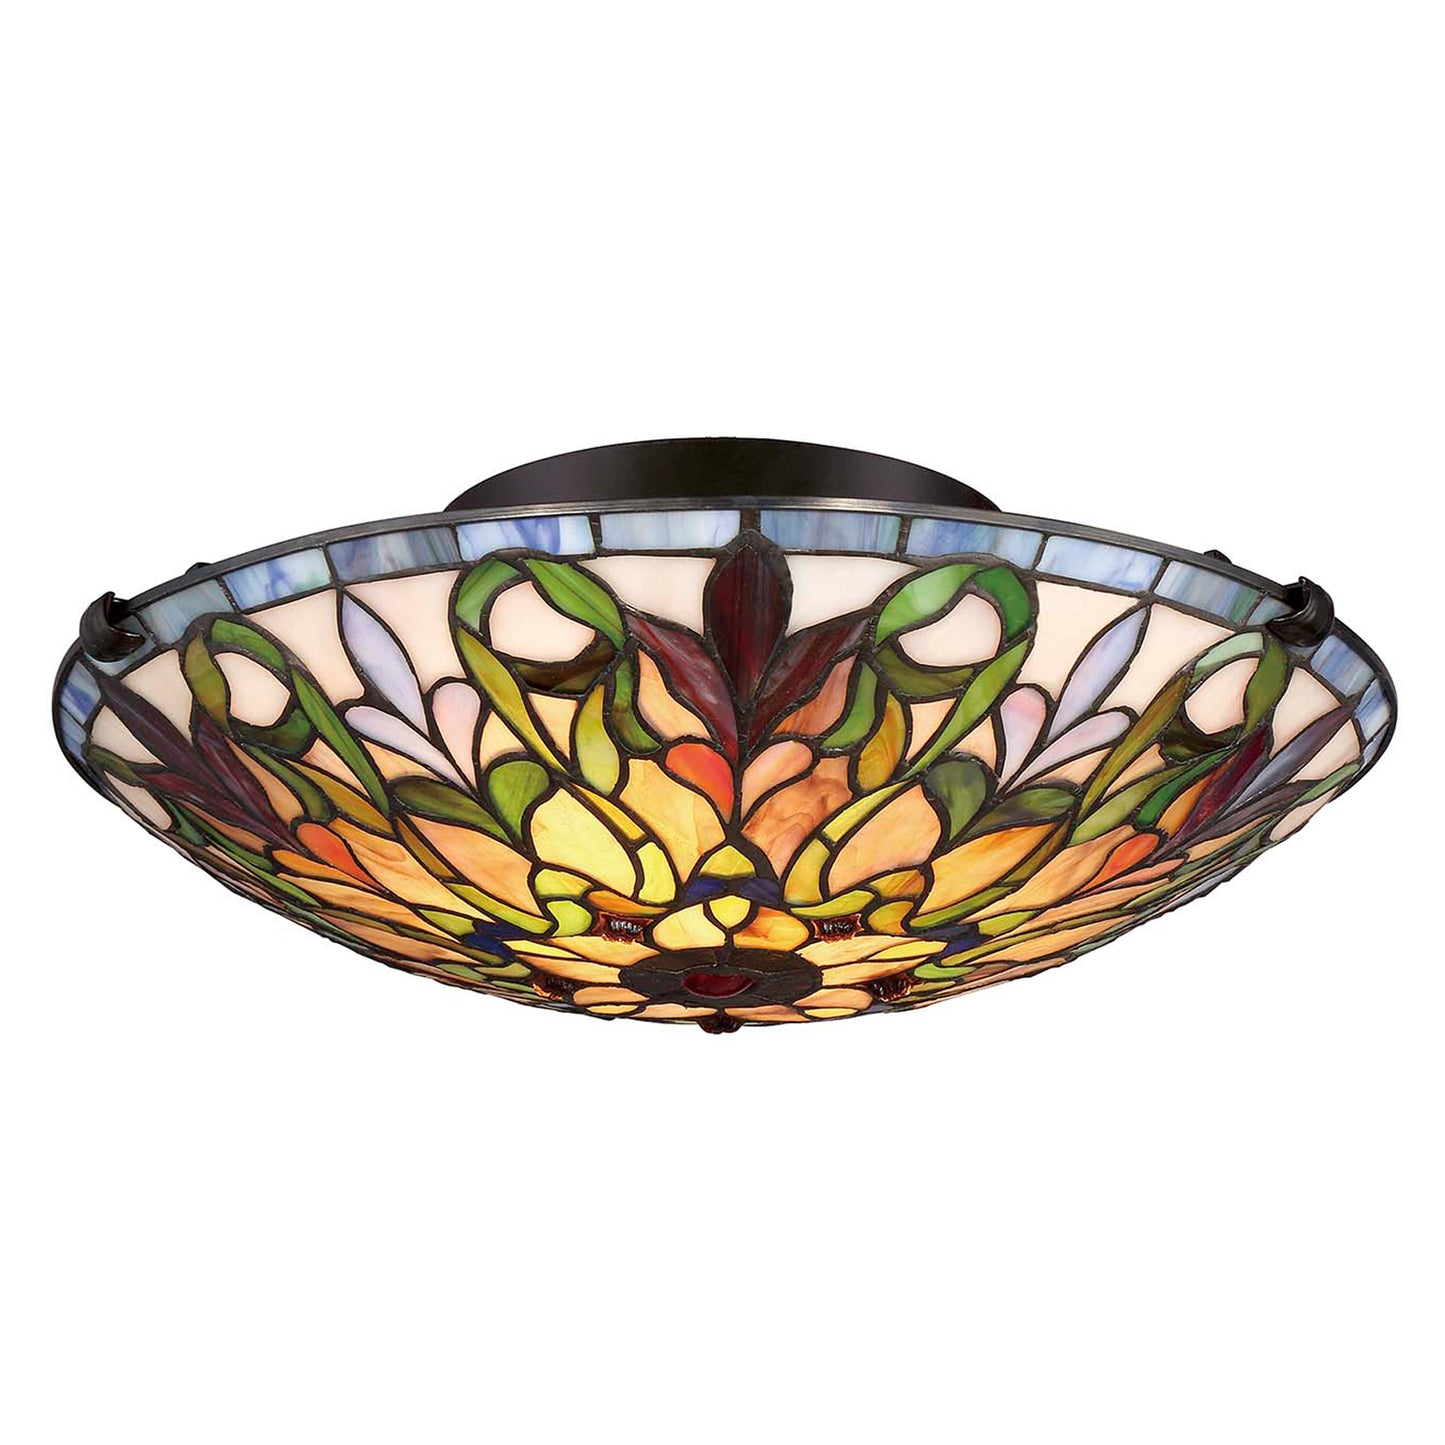 Angelia Stained Glass Ceiling Light, S1638